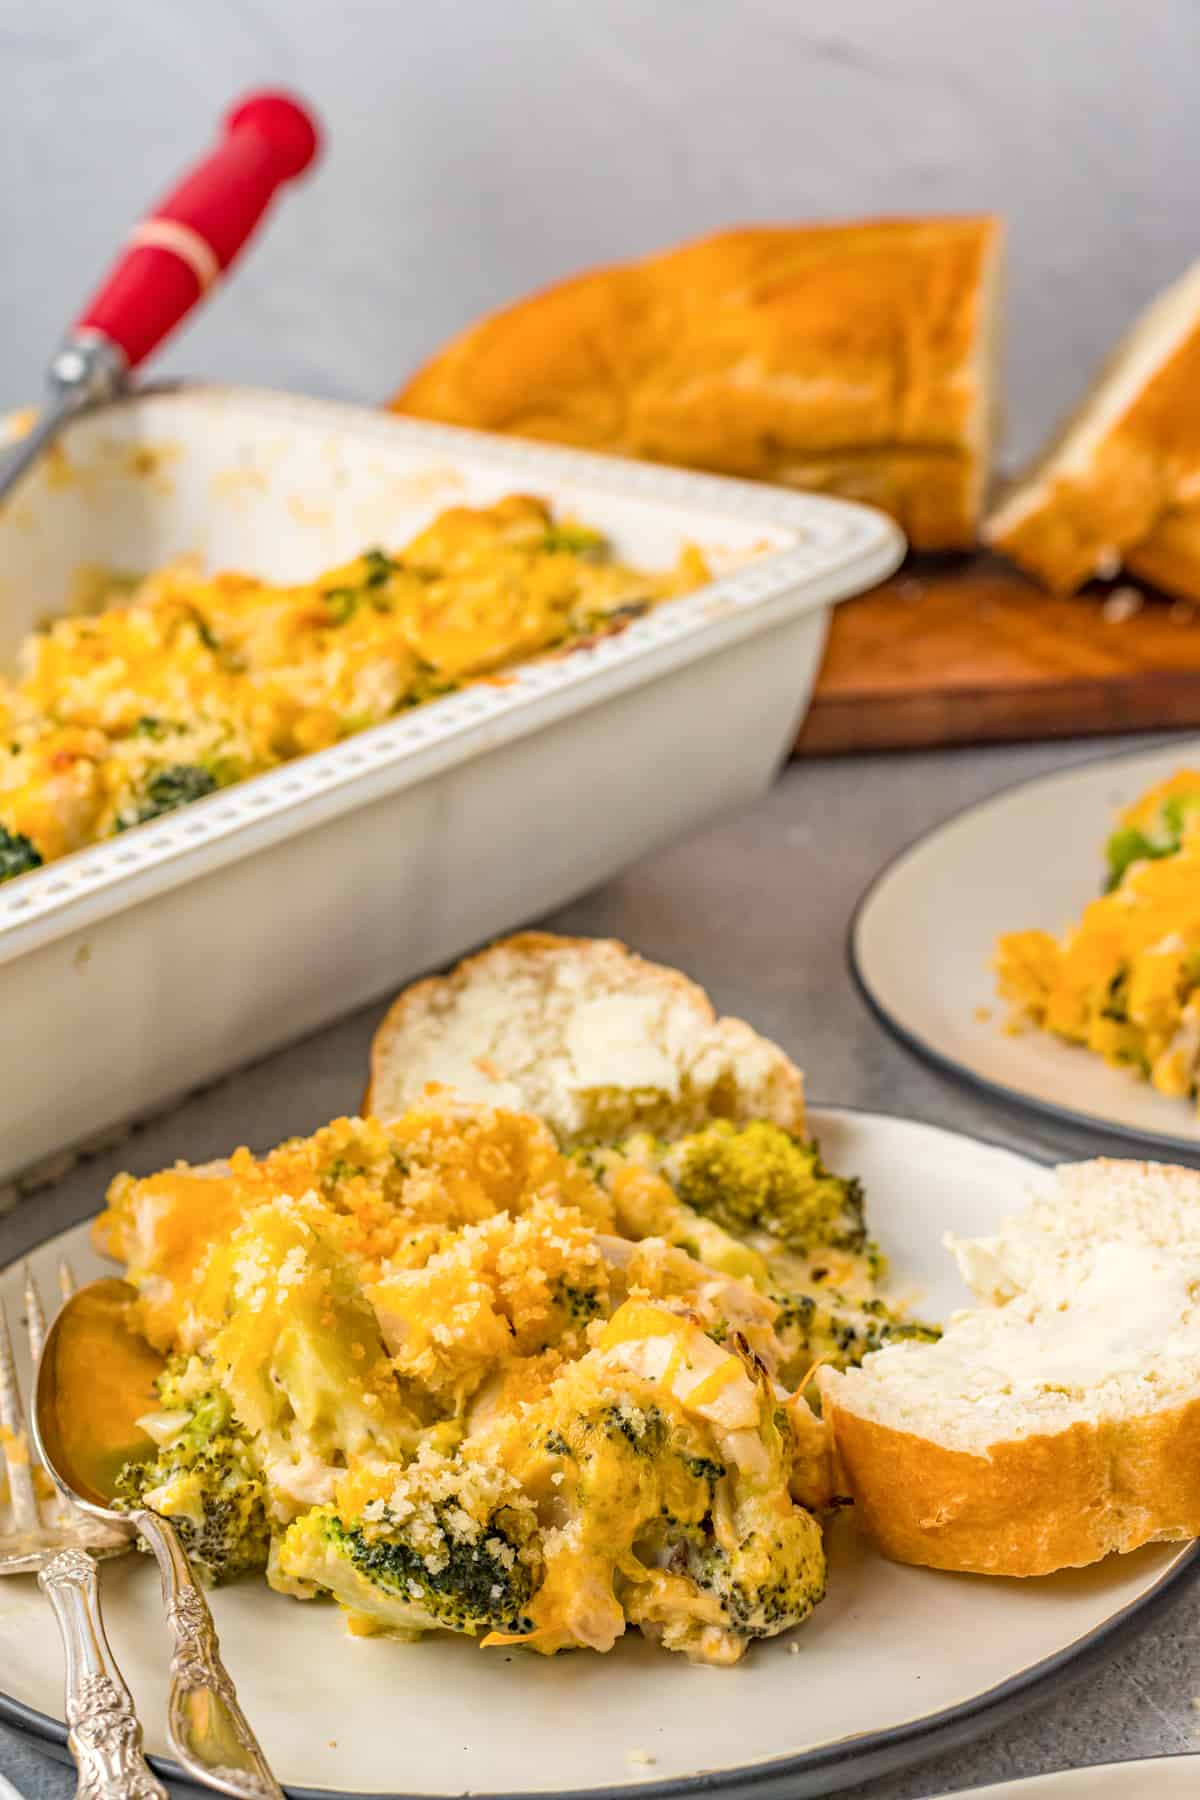 Chicken Divan Casserole  served with bread, with additional casserole and bread behind it.